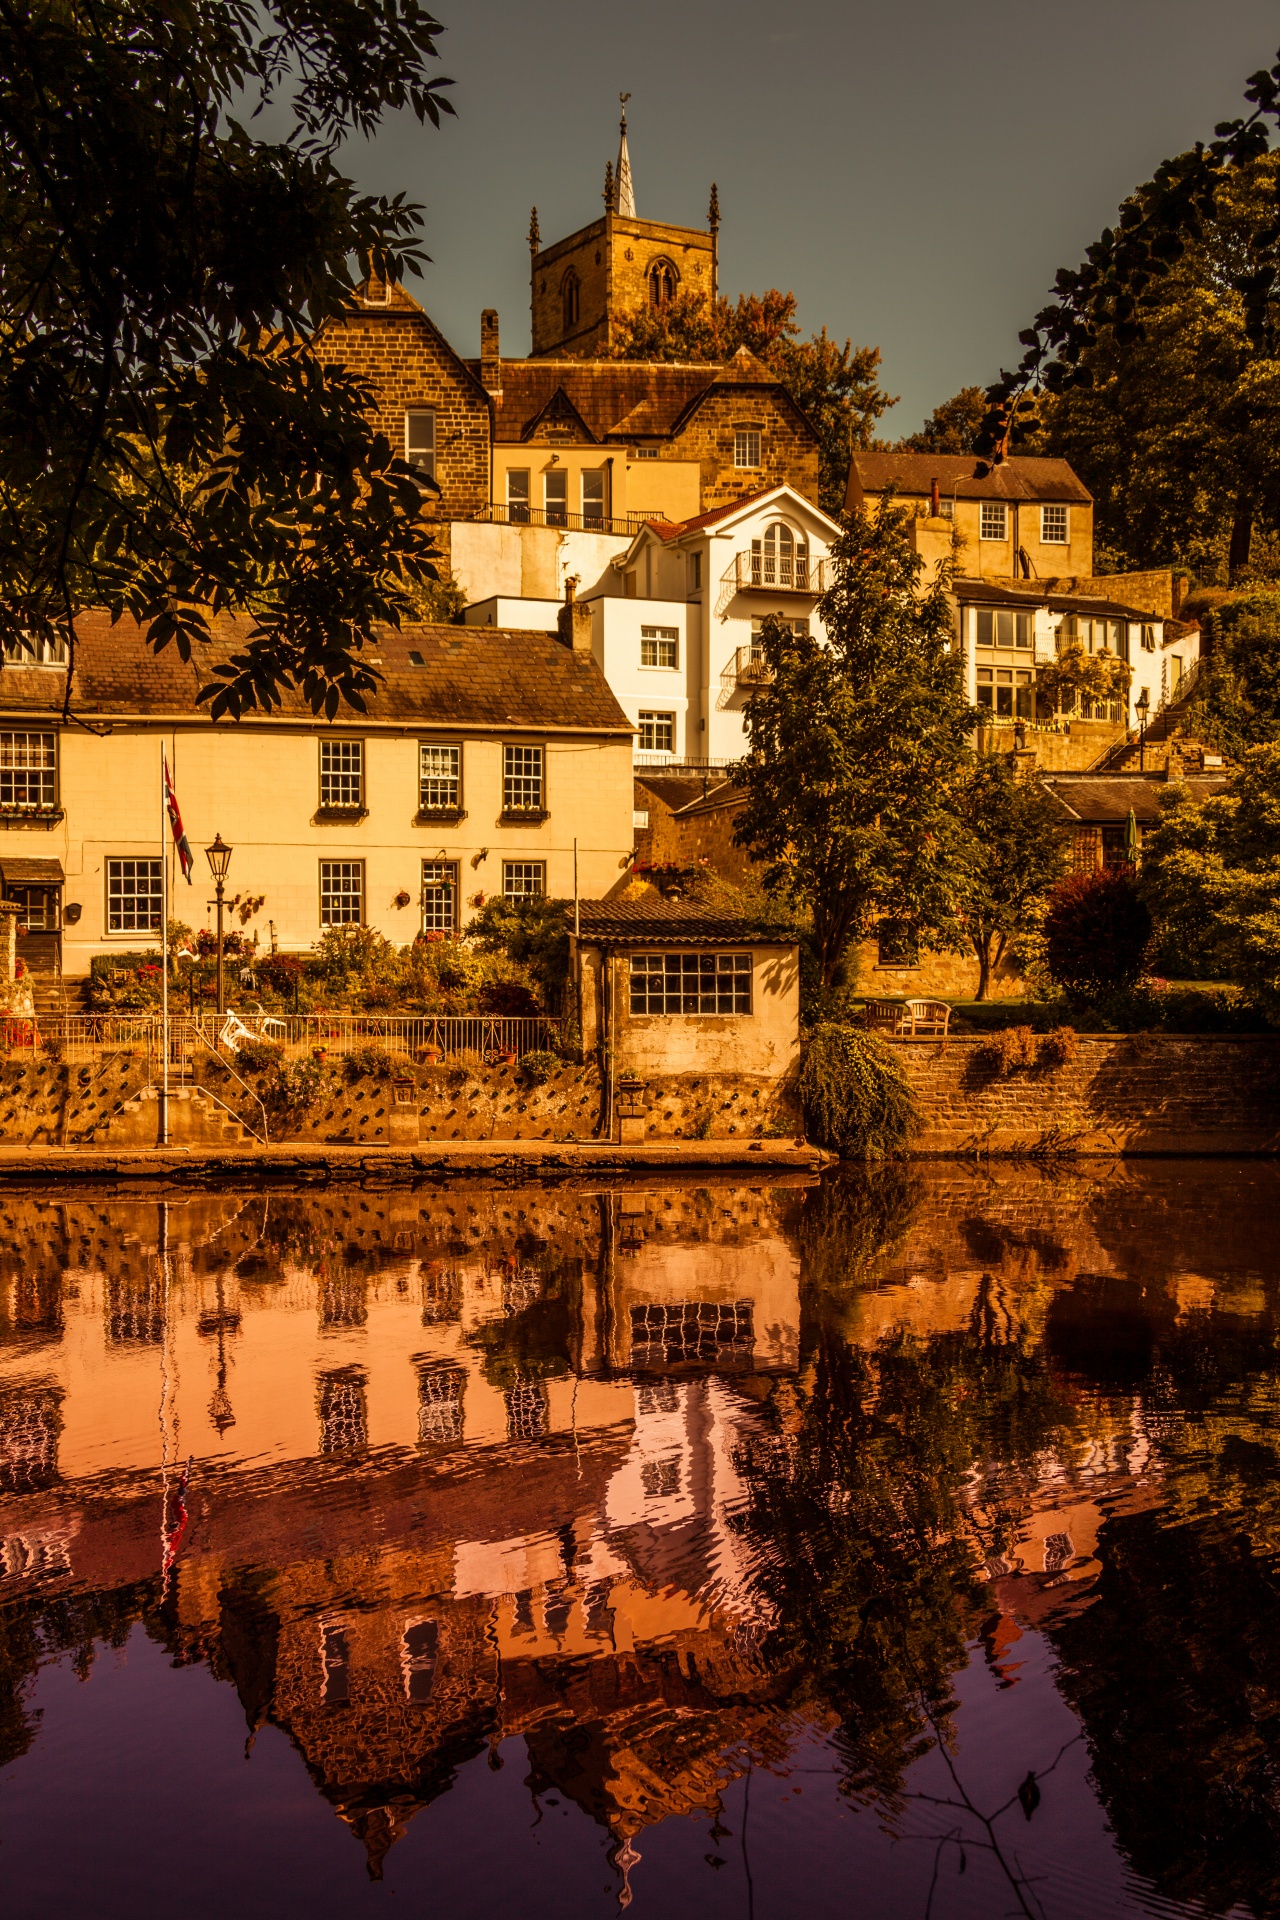 Reflection of houses in a village of Knaresborough